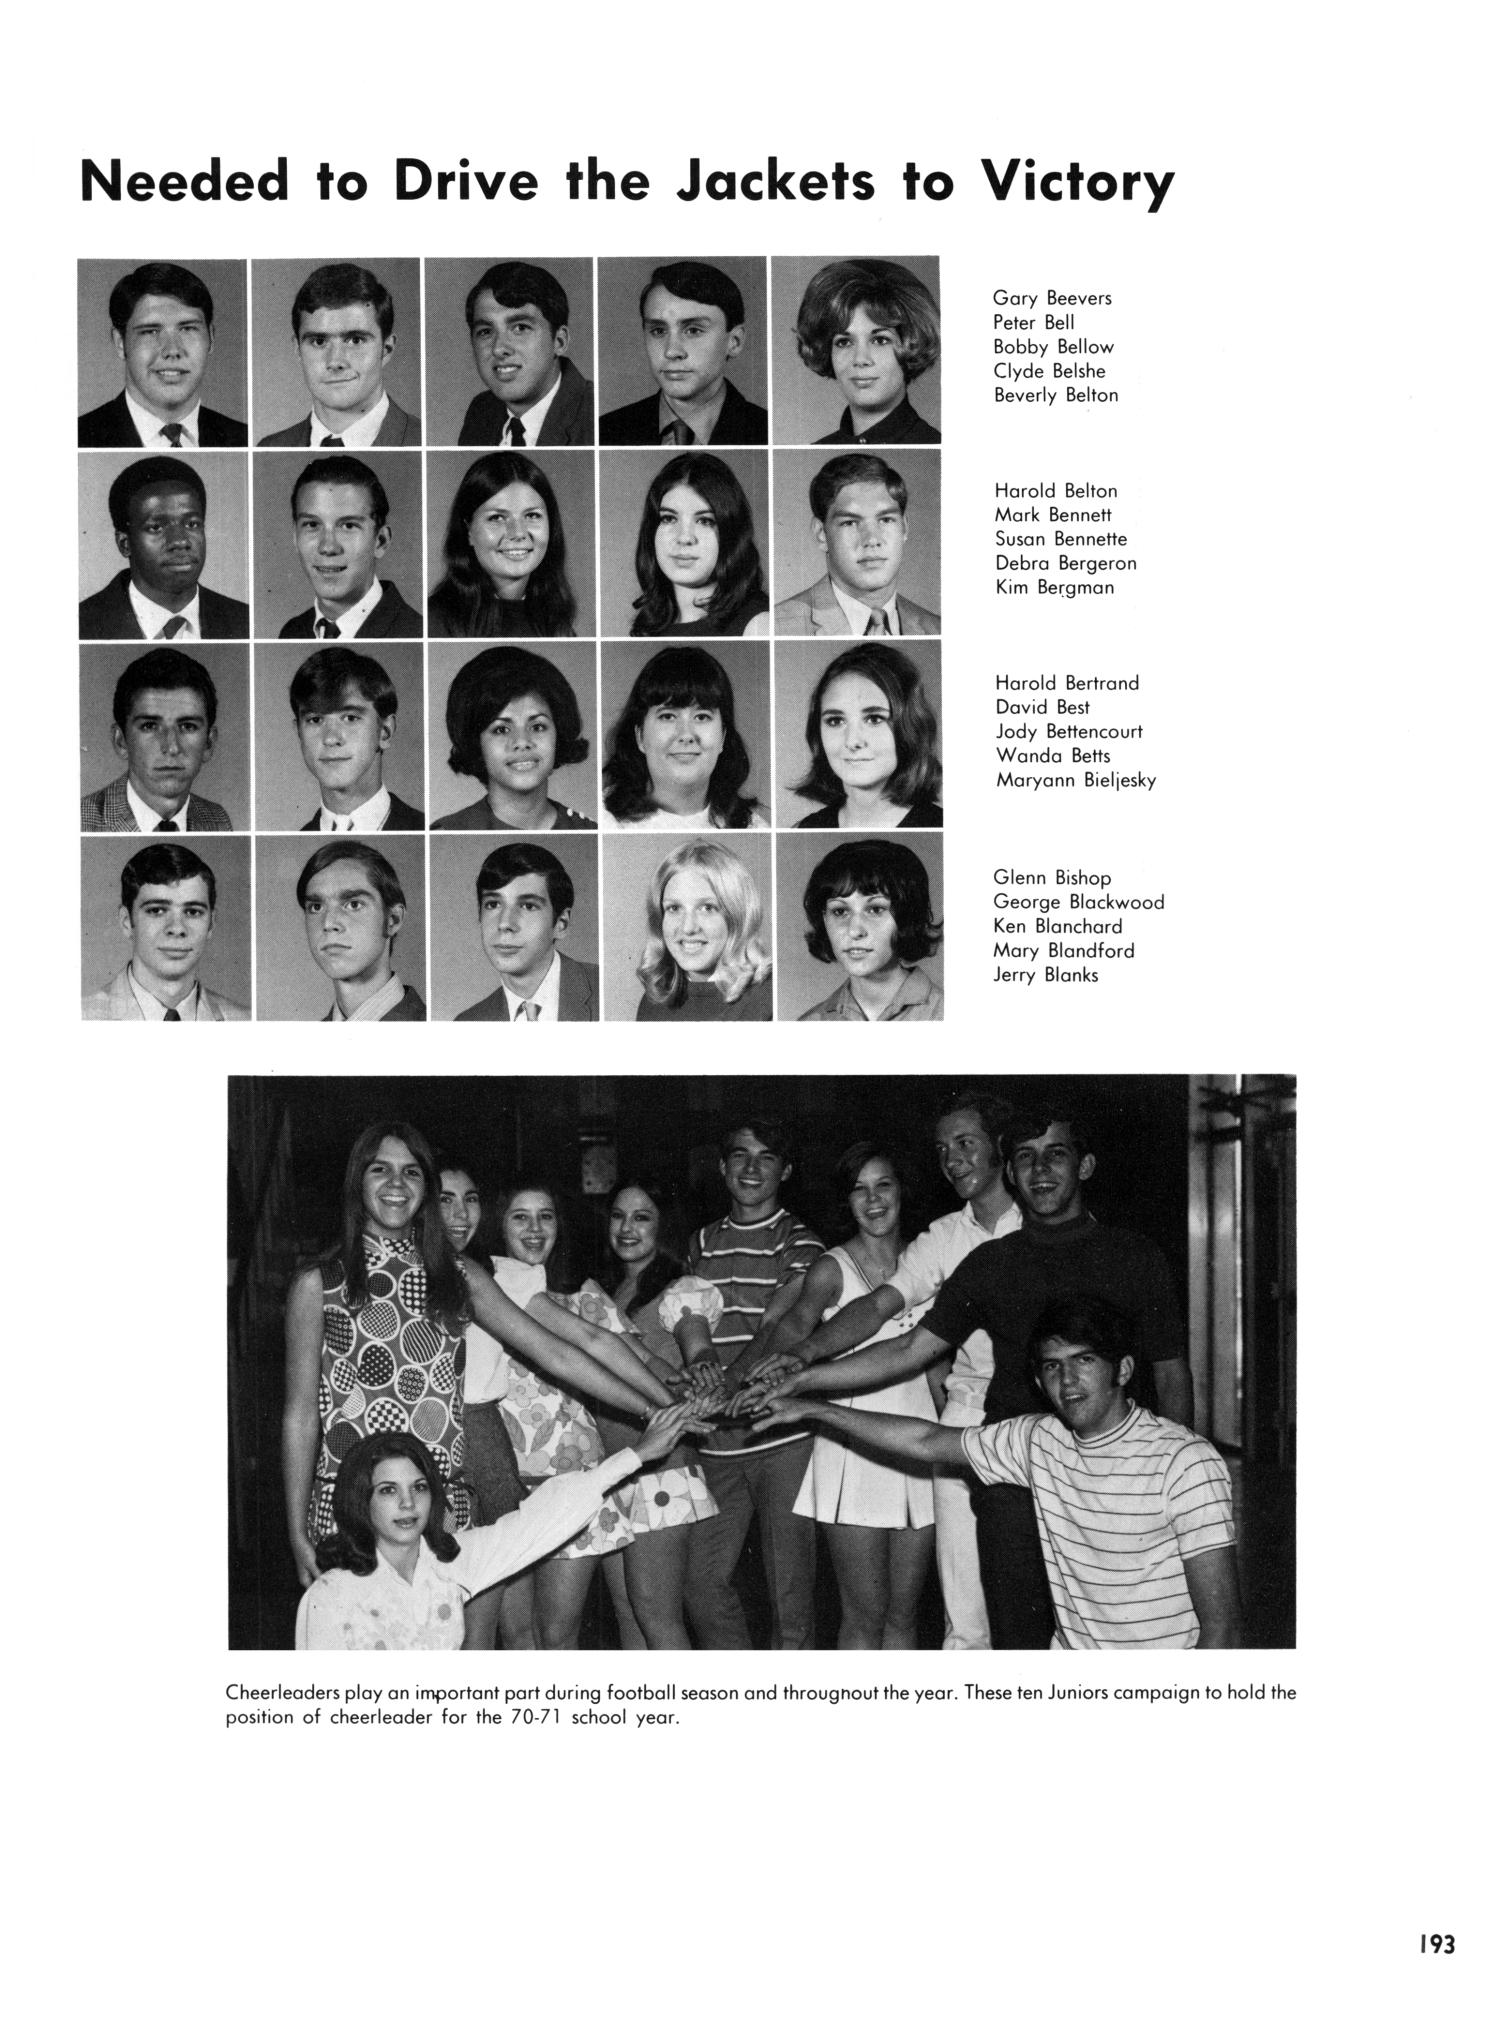 The Yellow Jacket, Yearbook of Thomas Jefferson High School, 1970
                                                
                                                    193
                                                